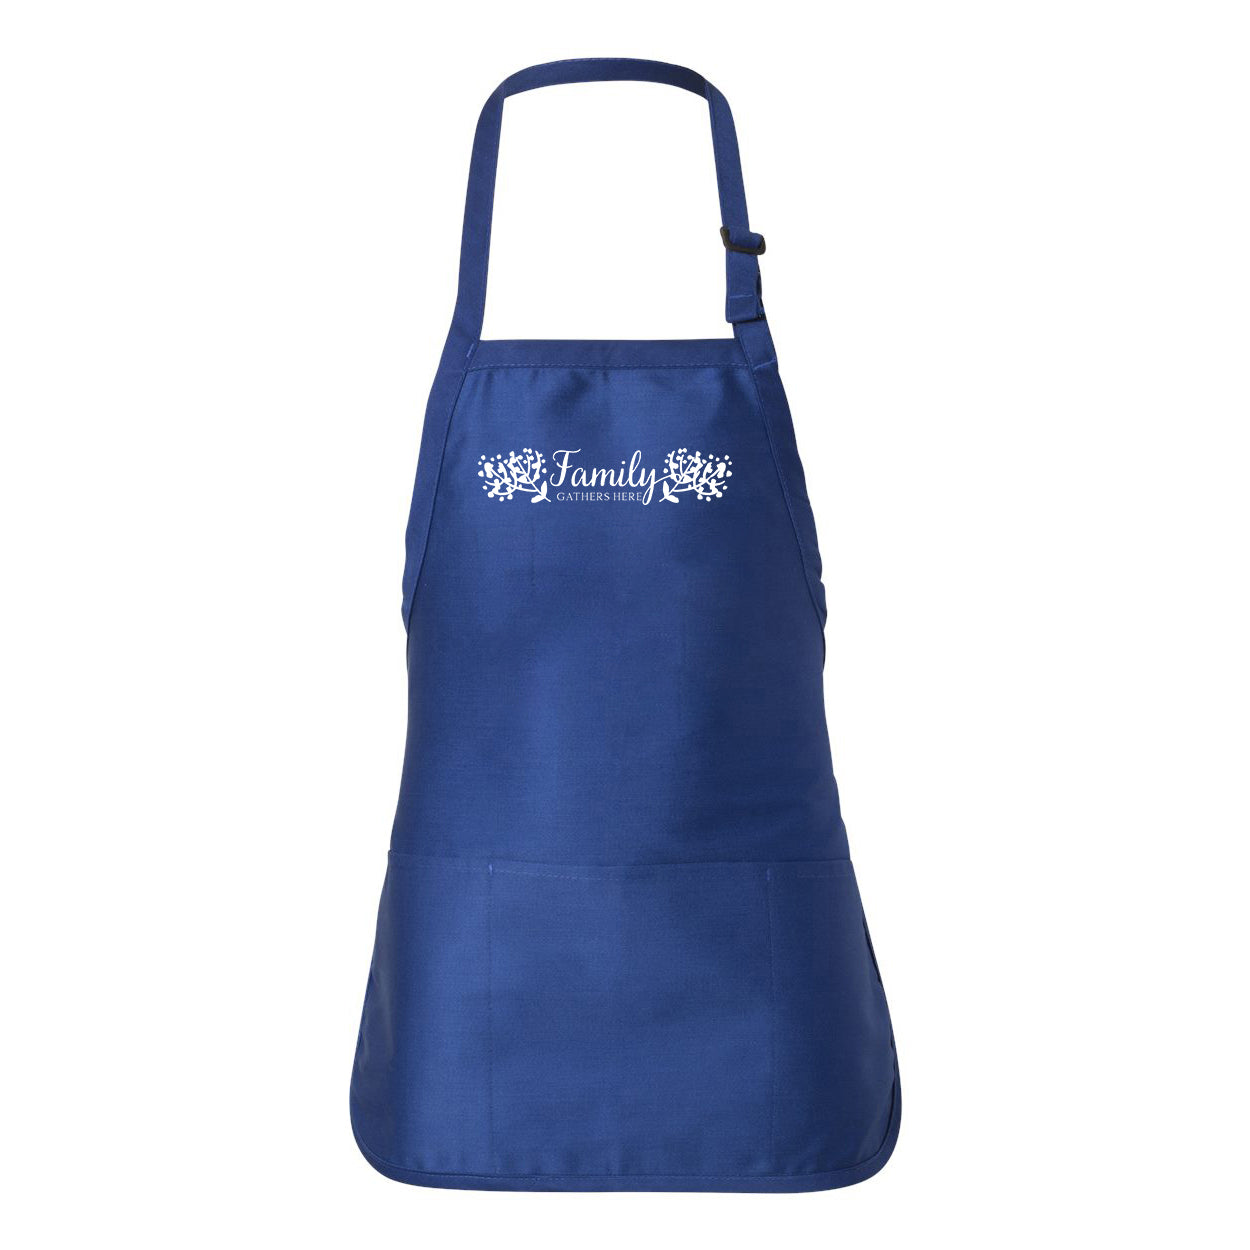 Family Gathers Here | Apron